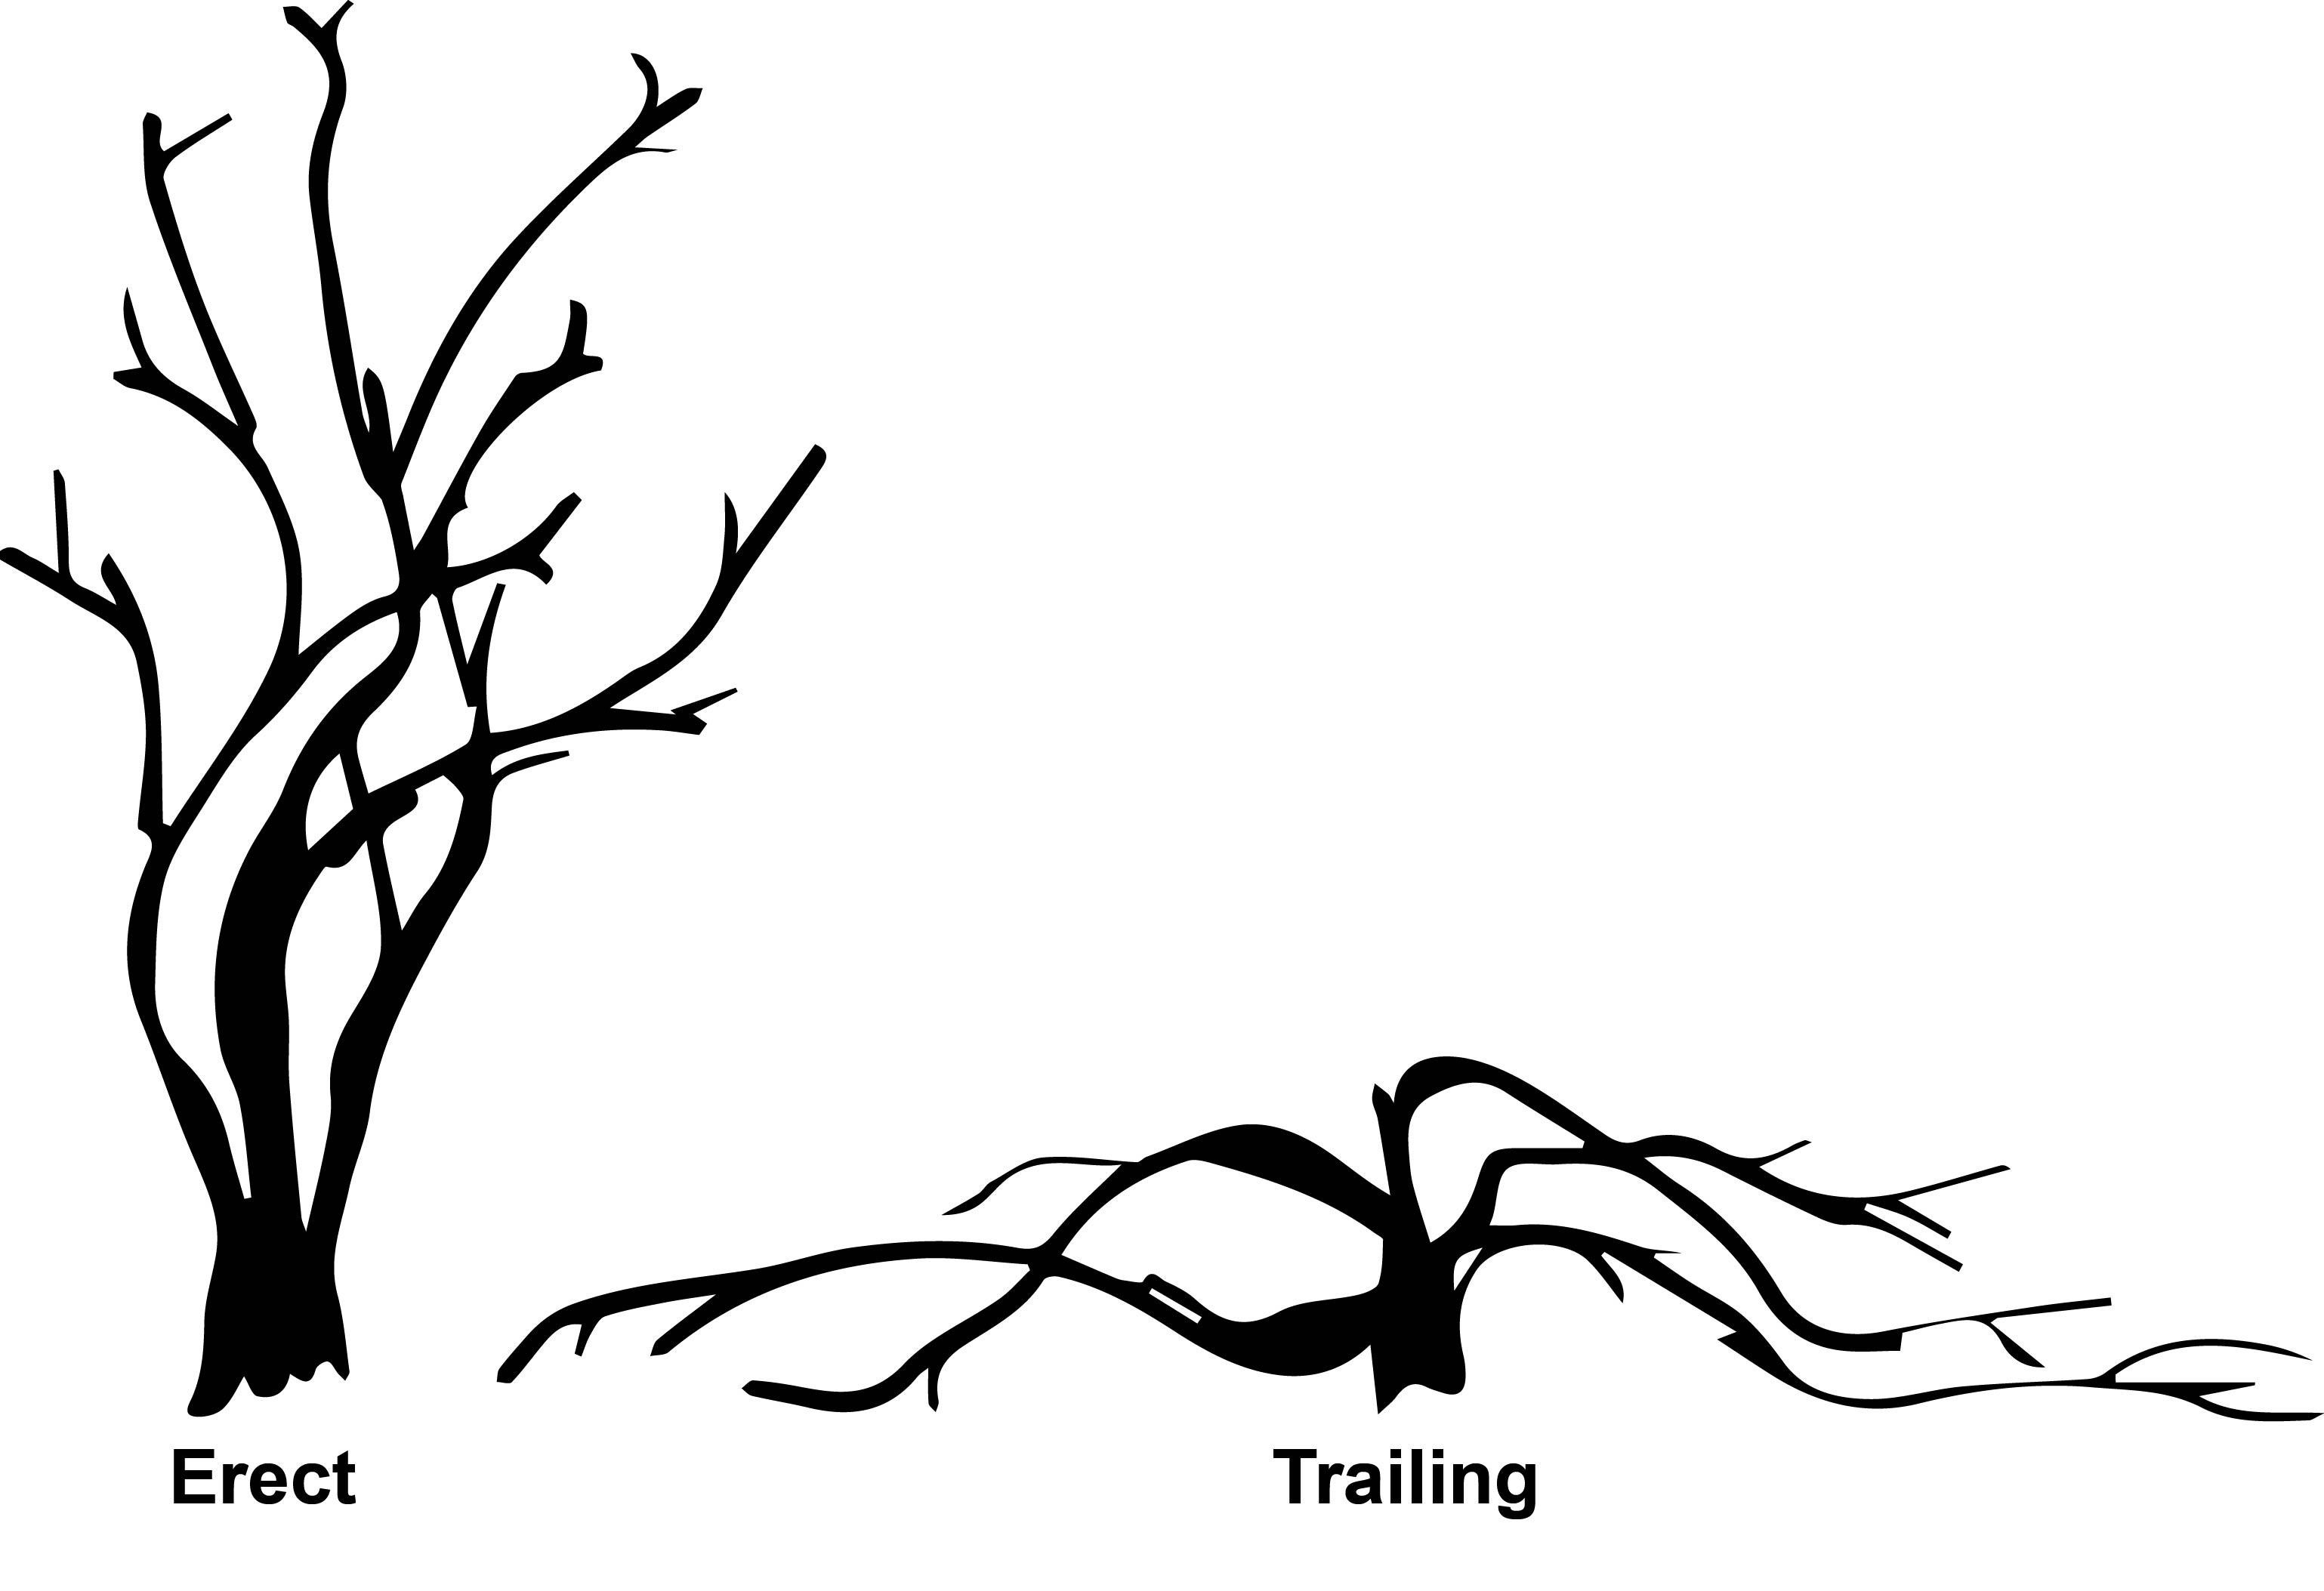 A diagram of a erect and training blackberry bush.